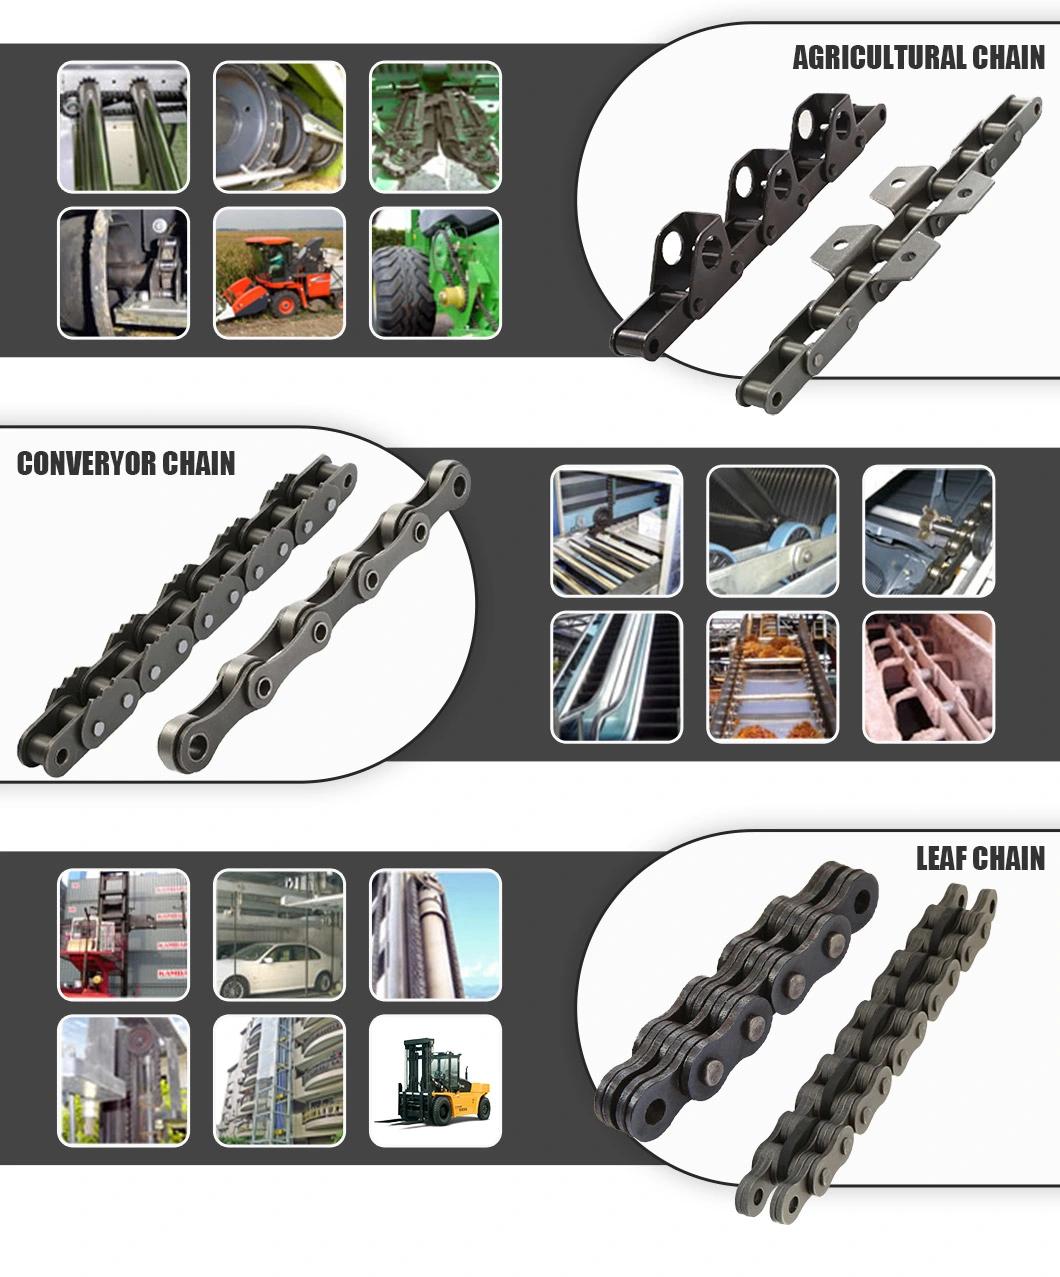 Zinc-Plated Alloy Steel Material Agricultural Chain with Attachment